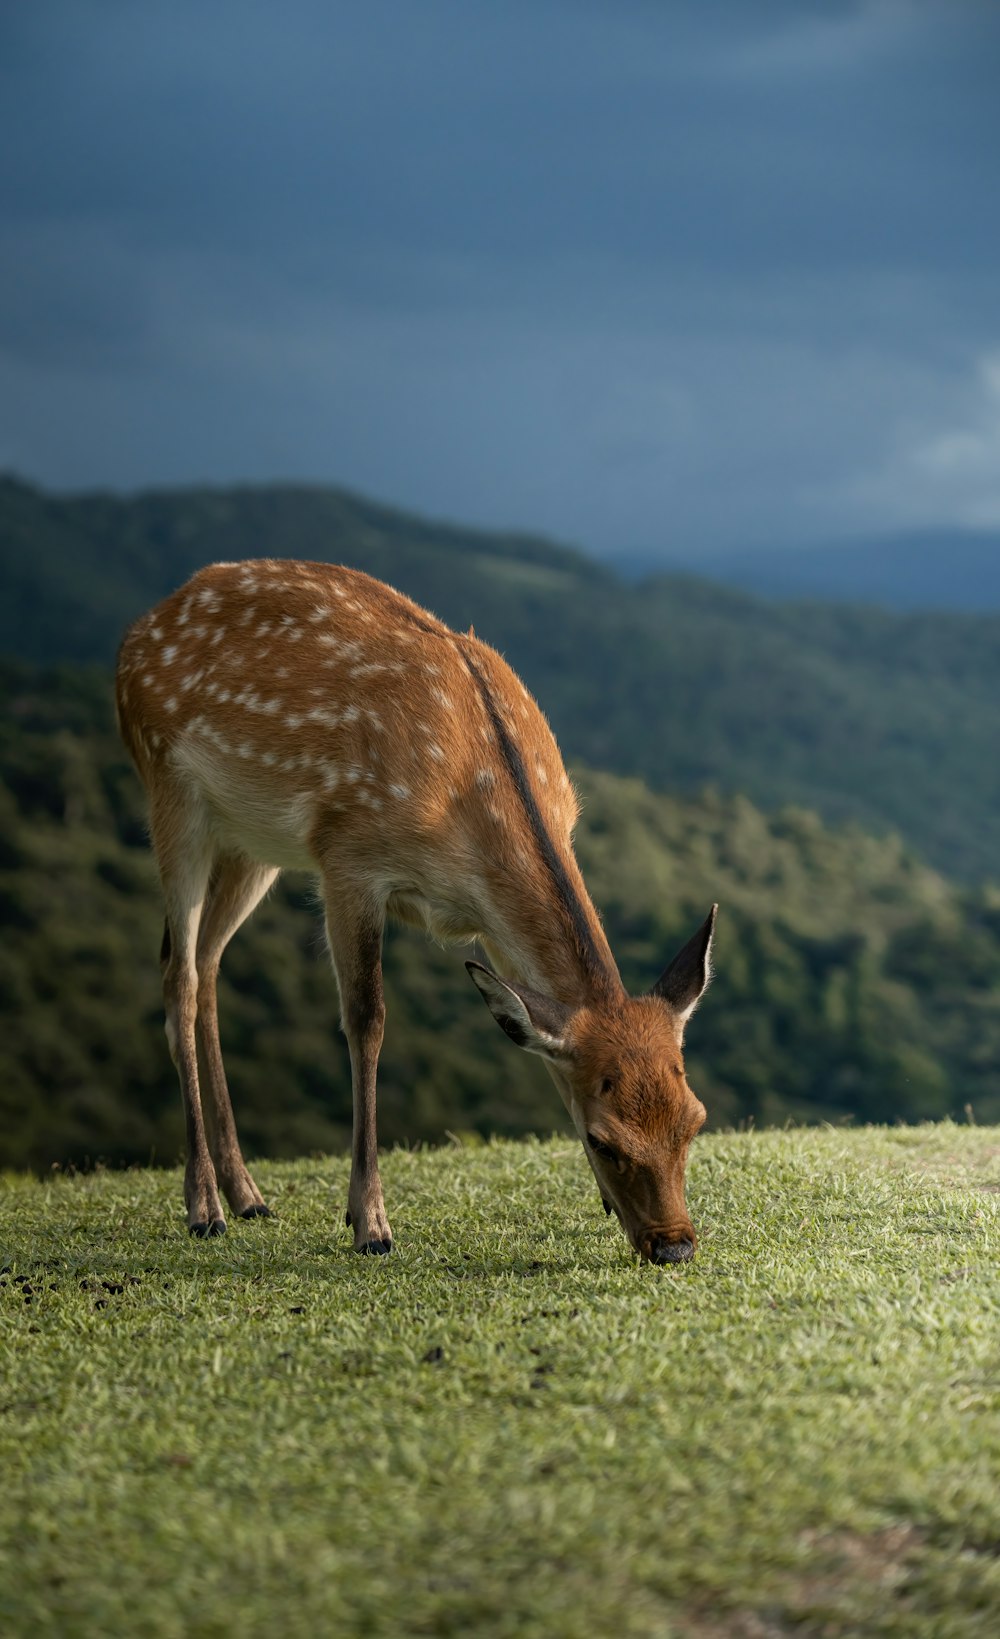 a deer eating grass in a field with mountains in the background